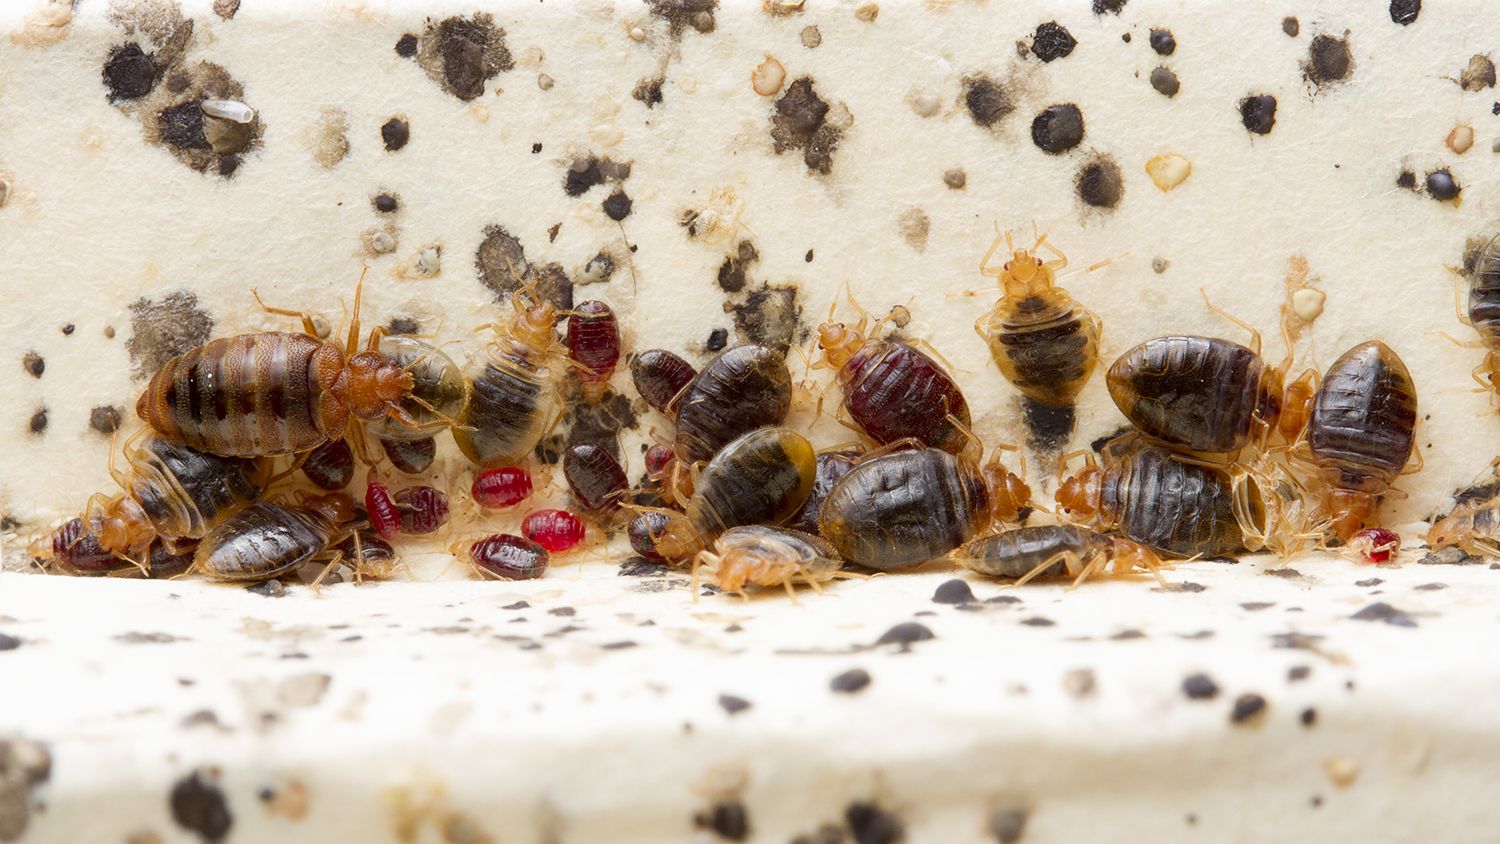 Bed bugs on fabric